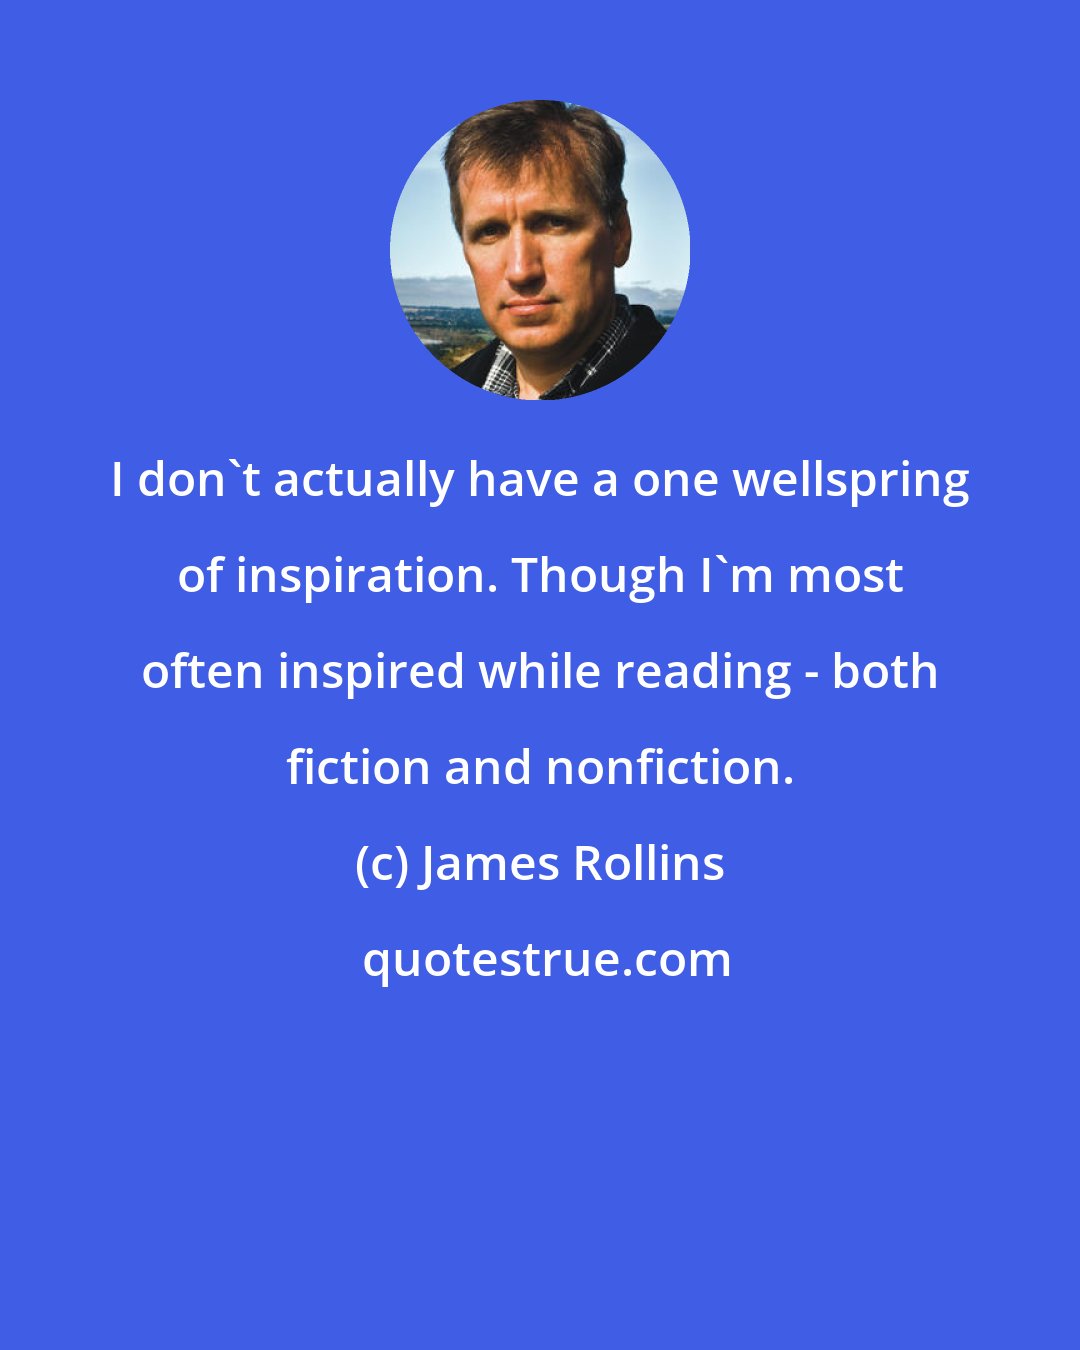 James Rollins: I don't actually have a one wellspring of inspiration. Though I'm most often inspired while reading - both fiction and nonfiction.